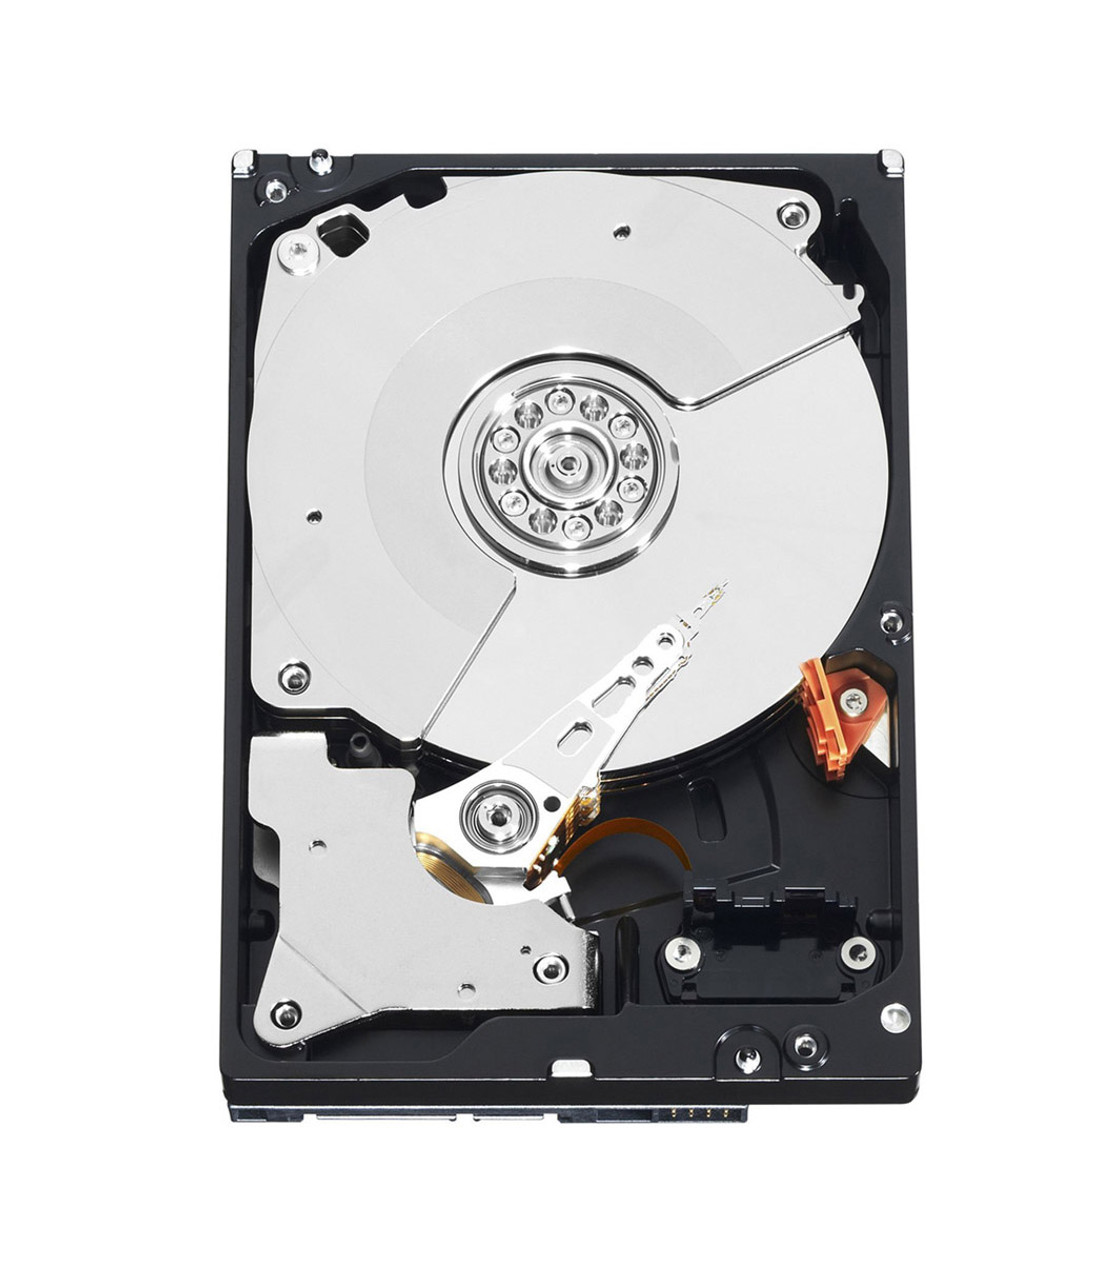 462-6585 Dell 3TB 7200RPM SATA 3Gbps Hot Swap 3.5-inch Internal Hard Drive with Tray